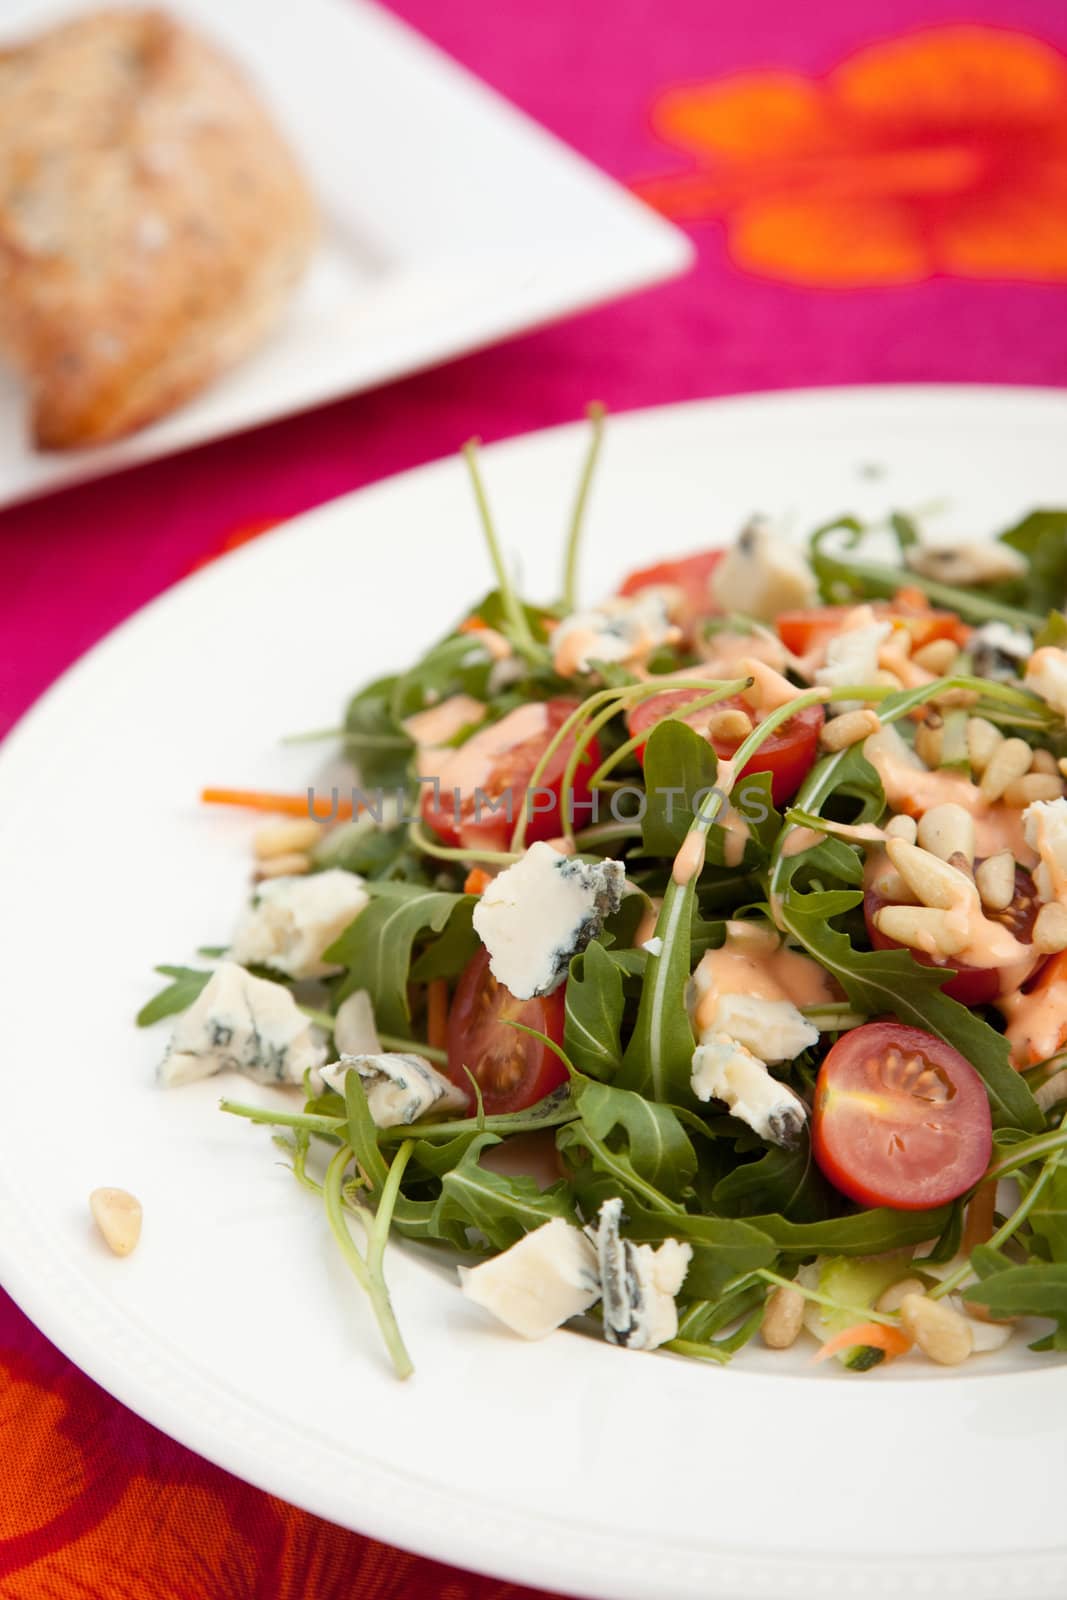 Delicious healthy salad with rocket, cheese and tomatoes